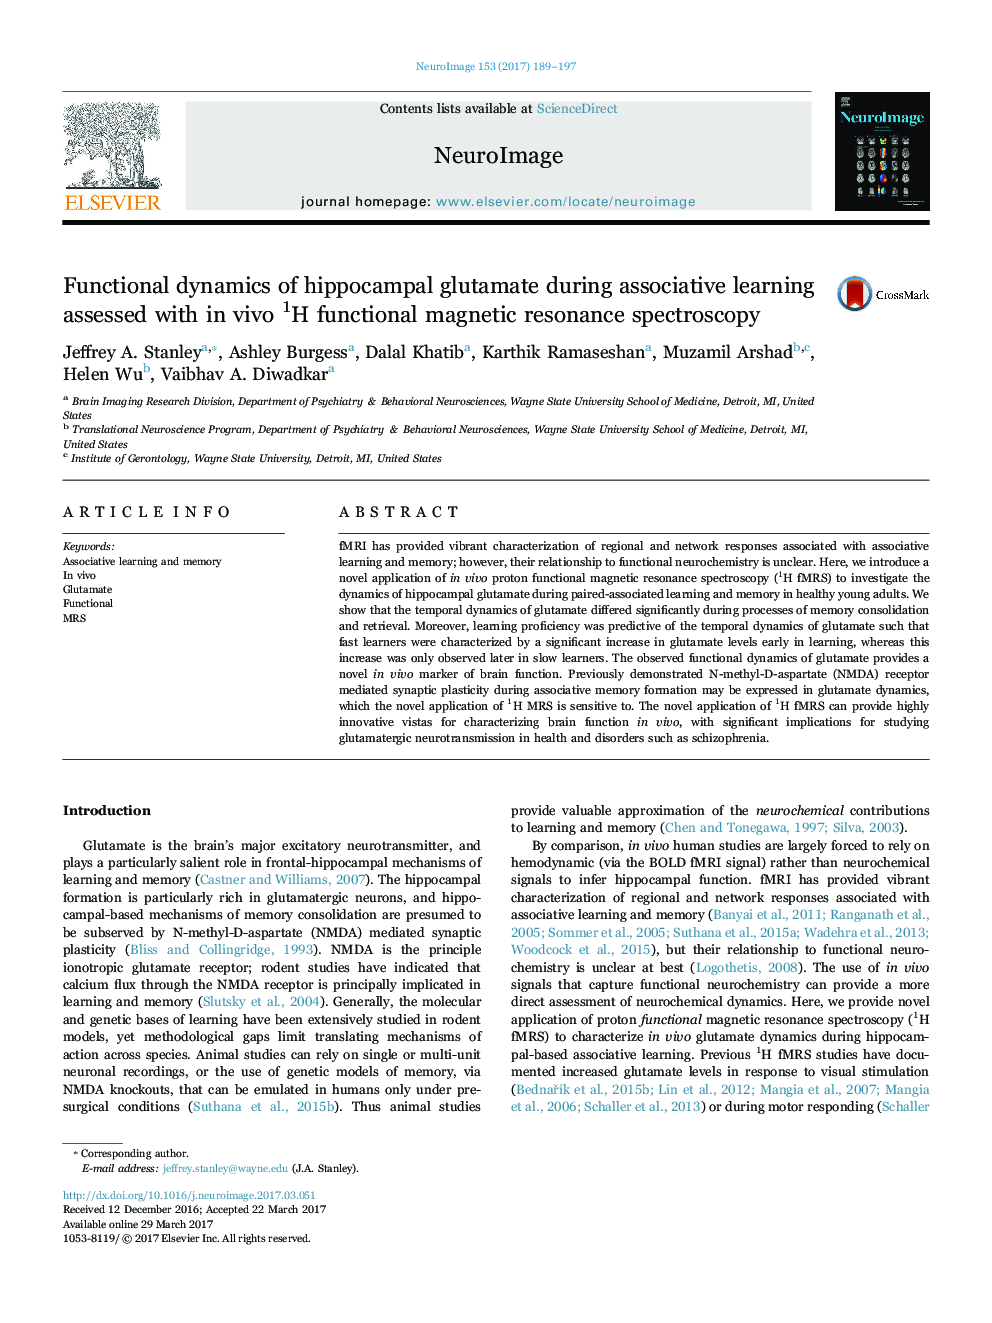 Functional dynamics of hippocampal glutamate during associative learning assessed with in vivo 1H functional magnetic resonance spectroscopy